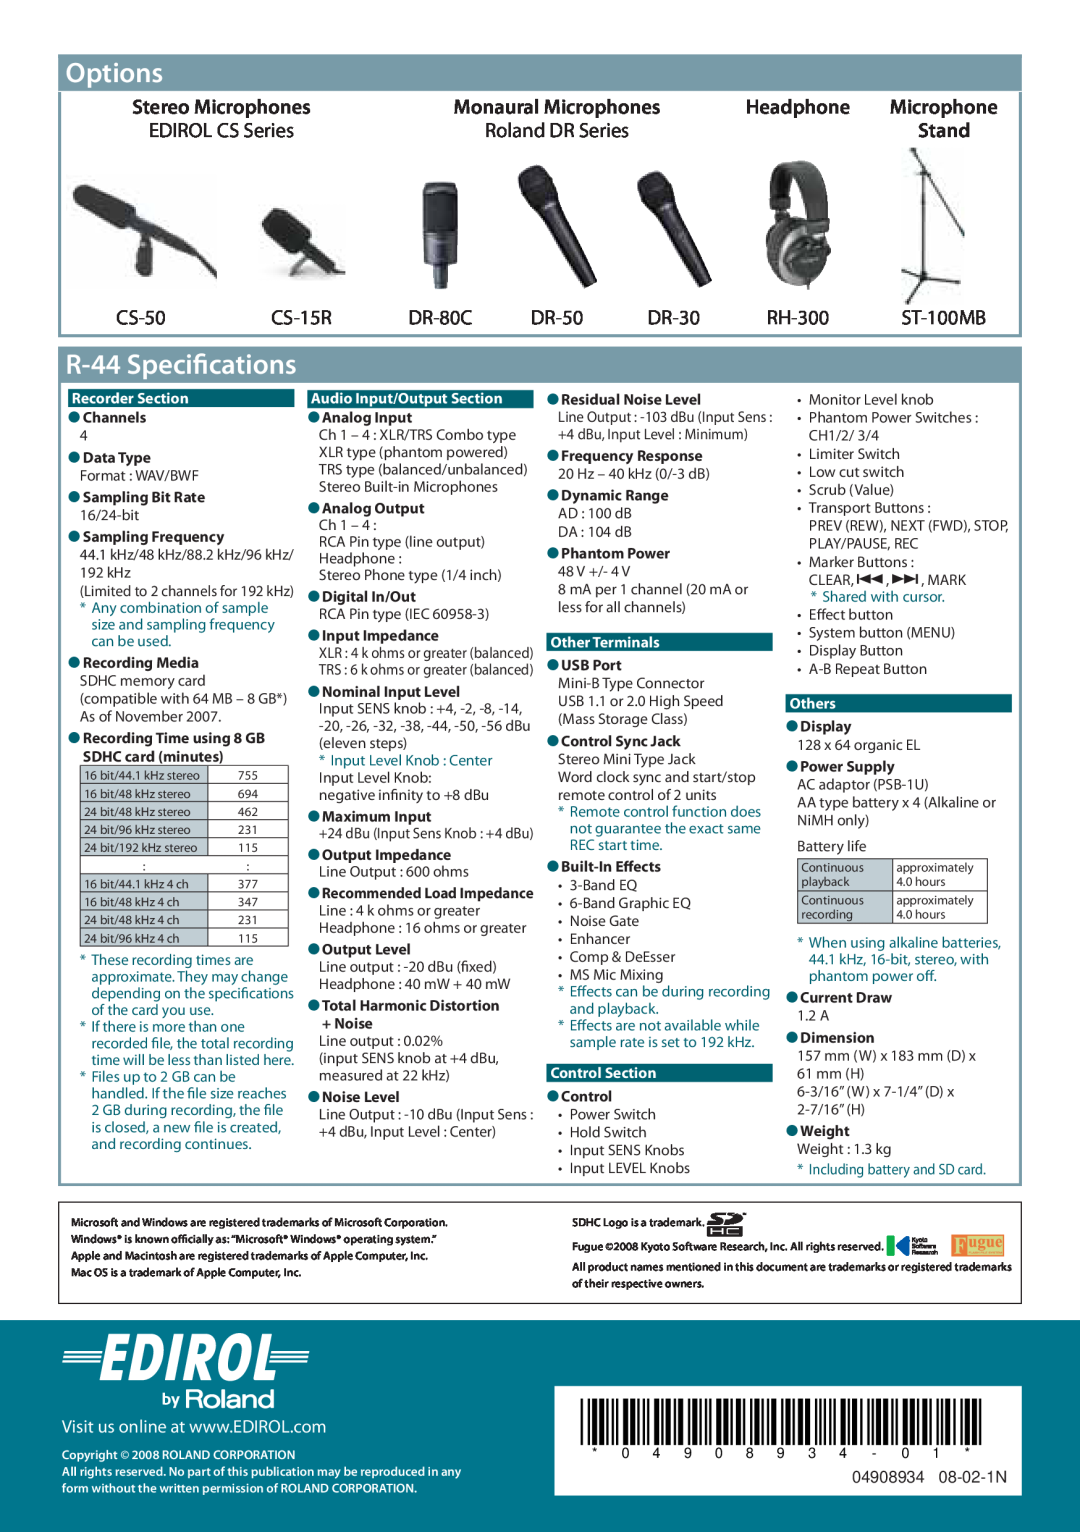 Edirol manual Options, R-44 Specifications, Headphone, Stereo Microphones, Monaural Microphones, Roland DR Series, Stand 